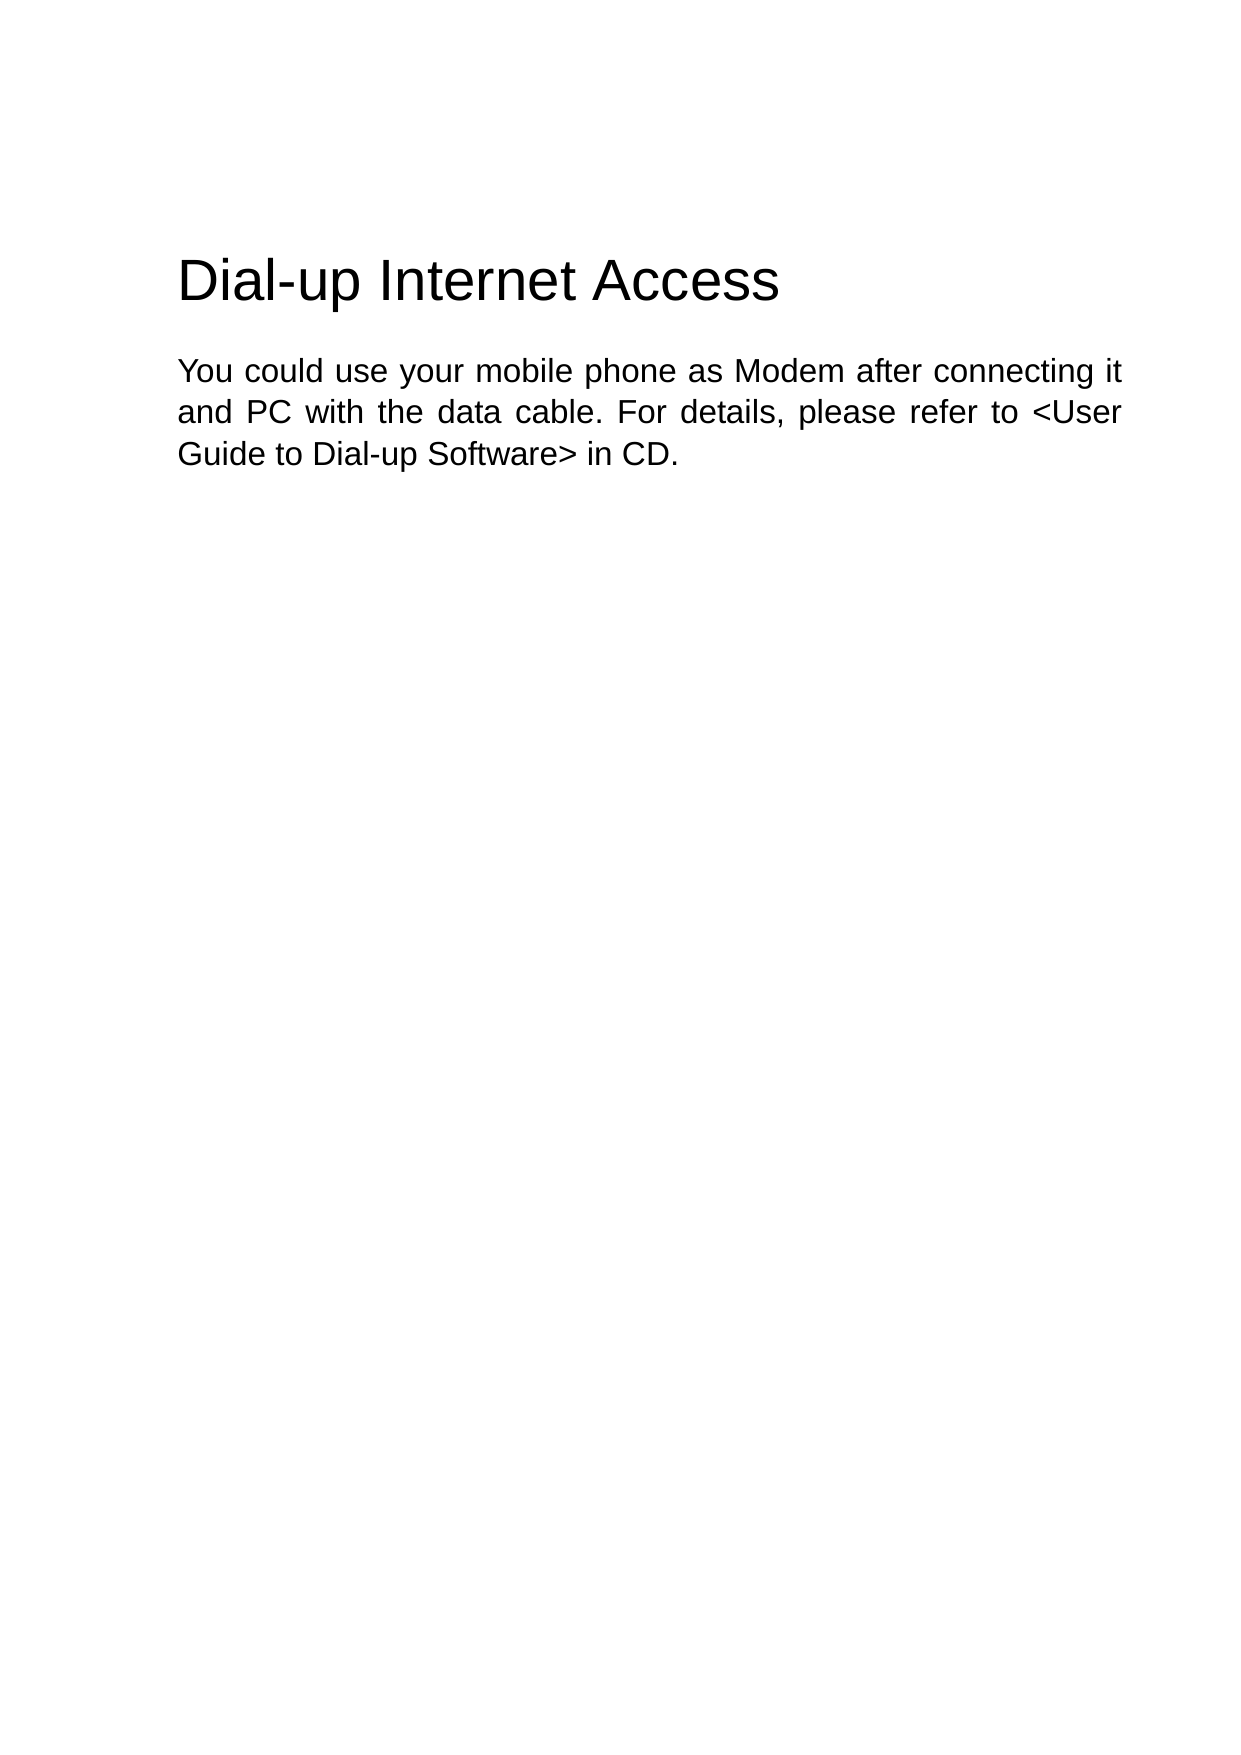   Dial-up Internet Access You could use your mobile phone as Modem after connecting it and PC with the data cable. For details, please refer to &lt;User Guide to Dial-up Software&gt; in CD.    